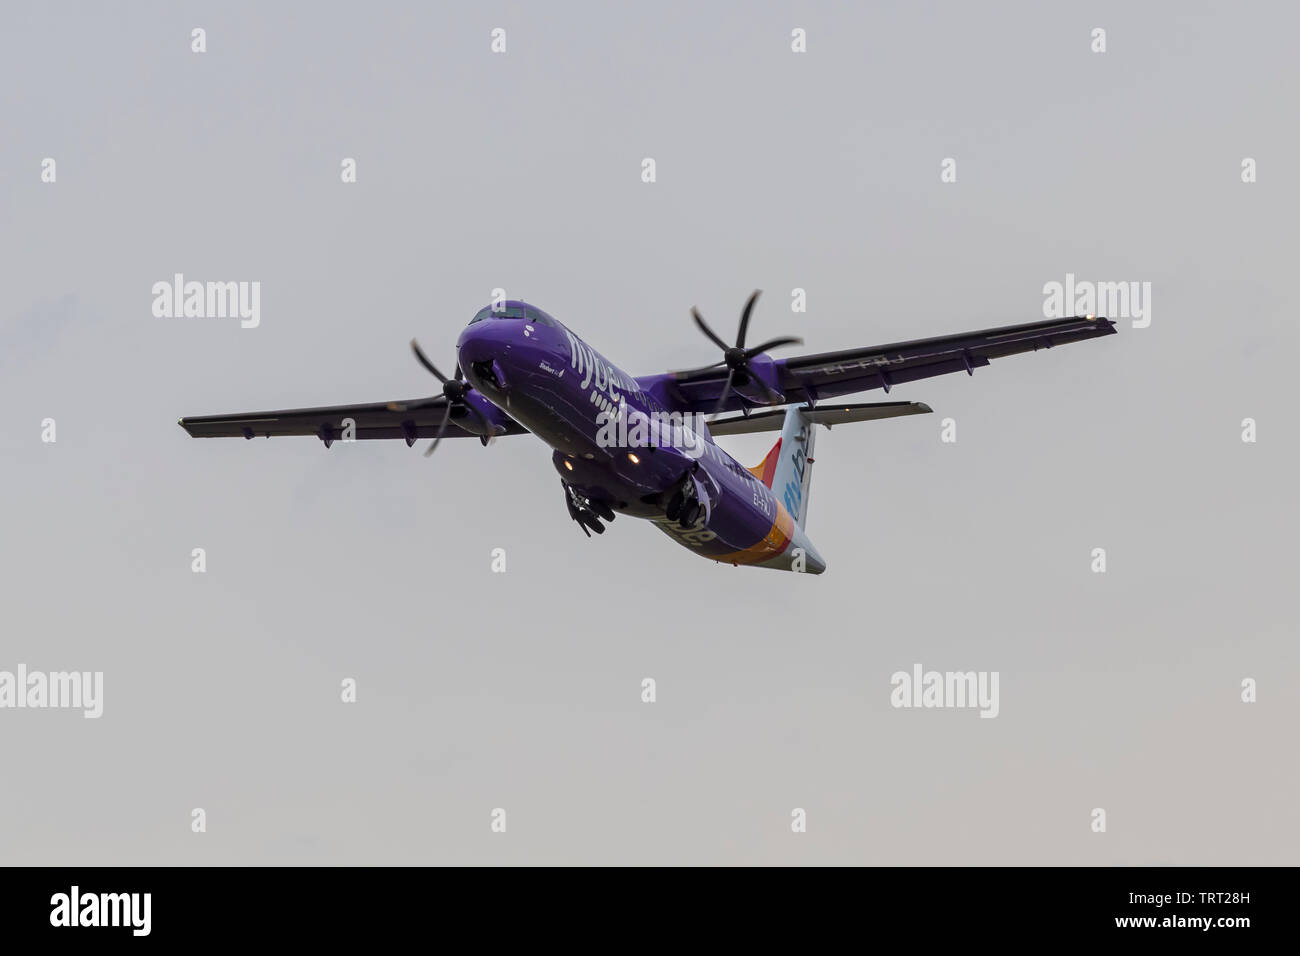 Flybe ATR72 Operated by Stobartair Taking off from Southend Airport Stock Photo